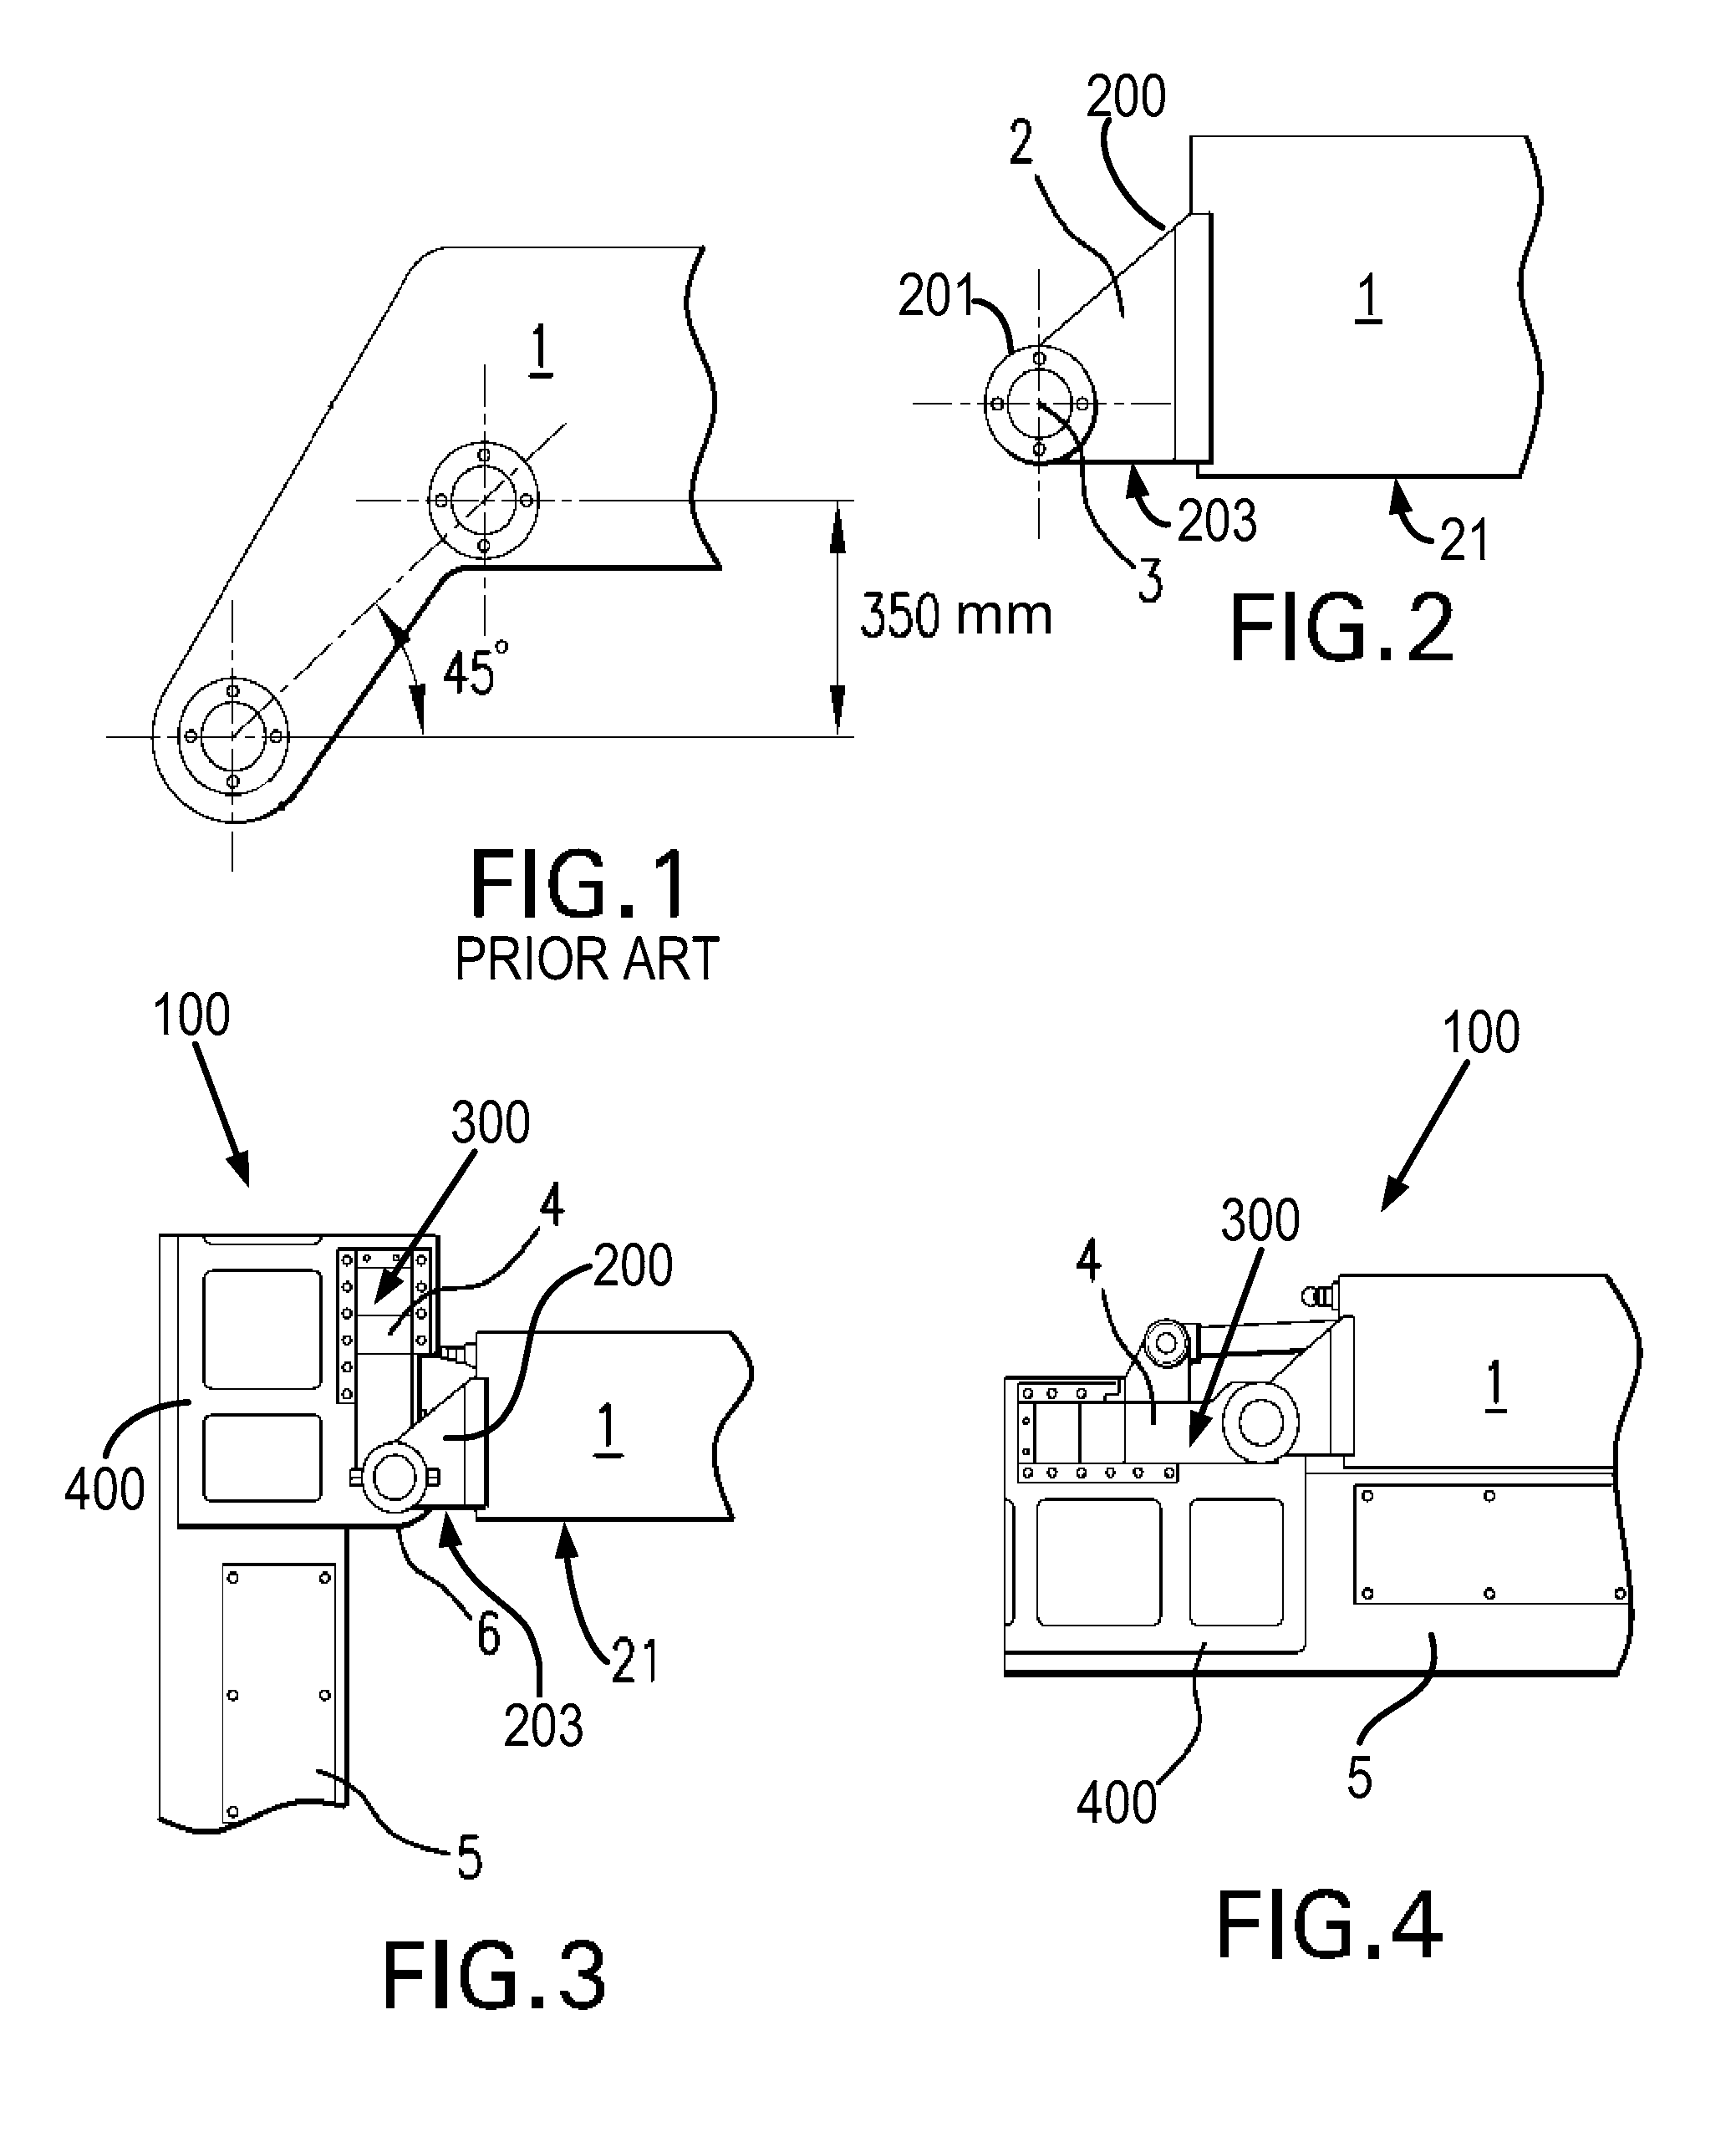 Arm folding mechanism for use in a vehicle-mounted radiation imaging system